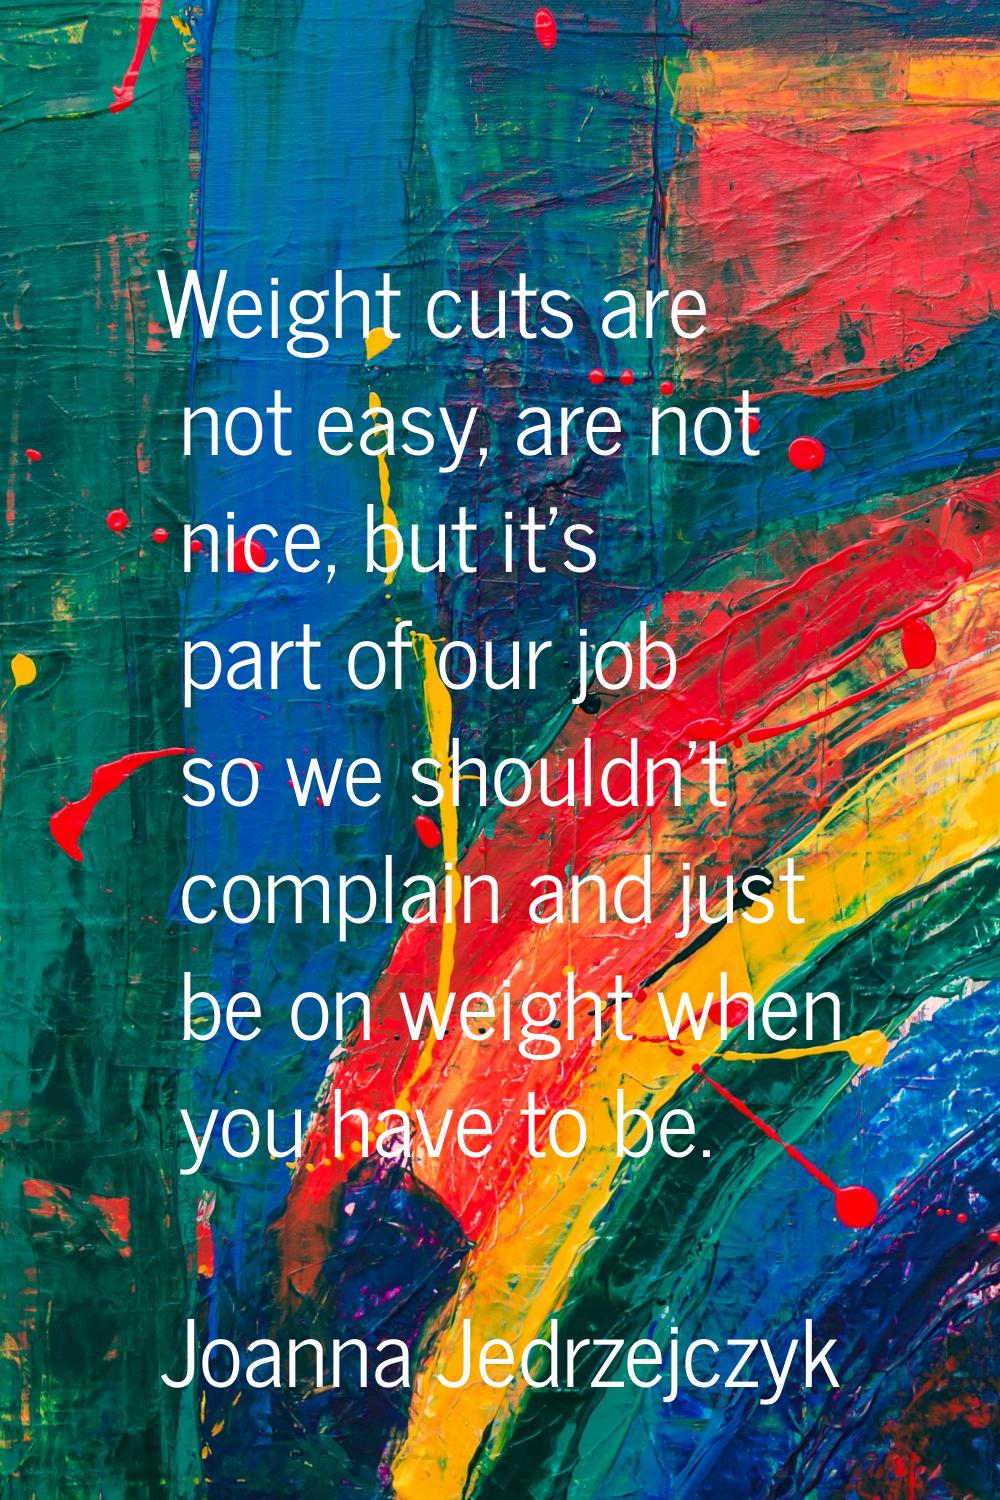 Weight cuts are not easy, are not nice, but it's part of our job so we shouldn't complain and just 